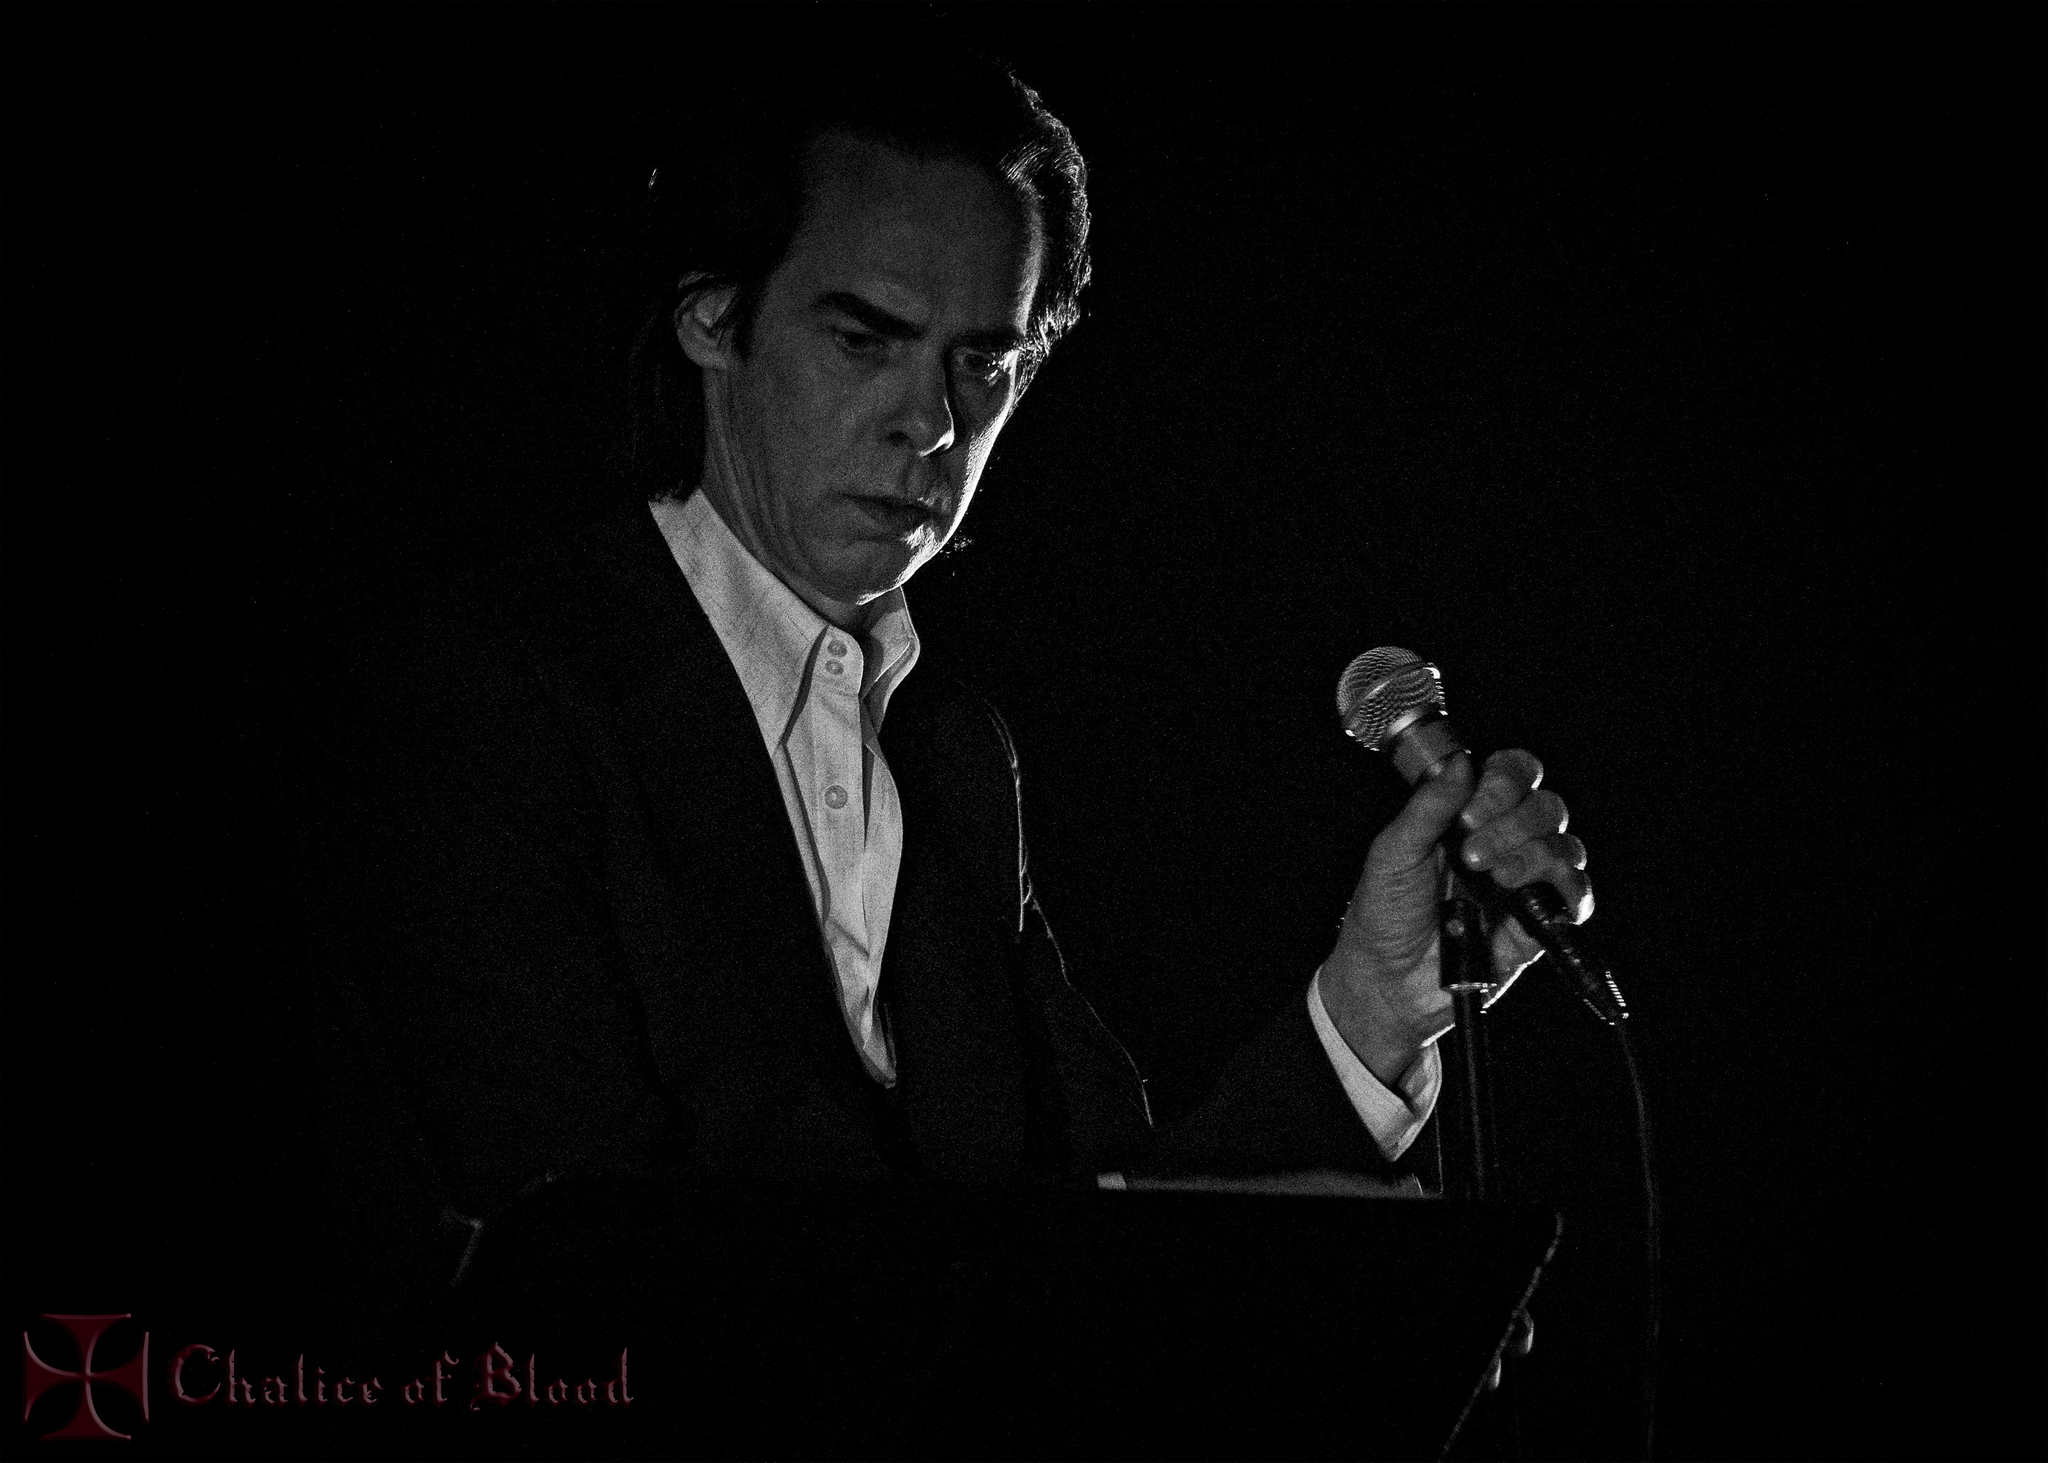 Concert Review: Nick Cave & The Bad Seeds, Auckland NZ, 2017